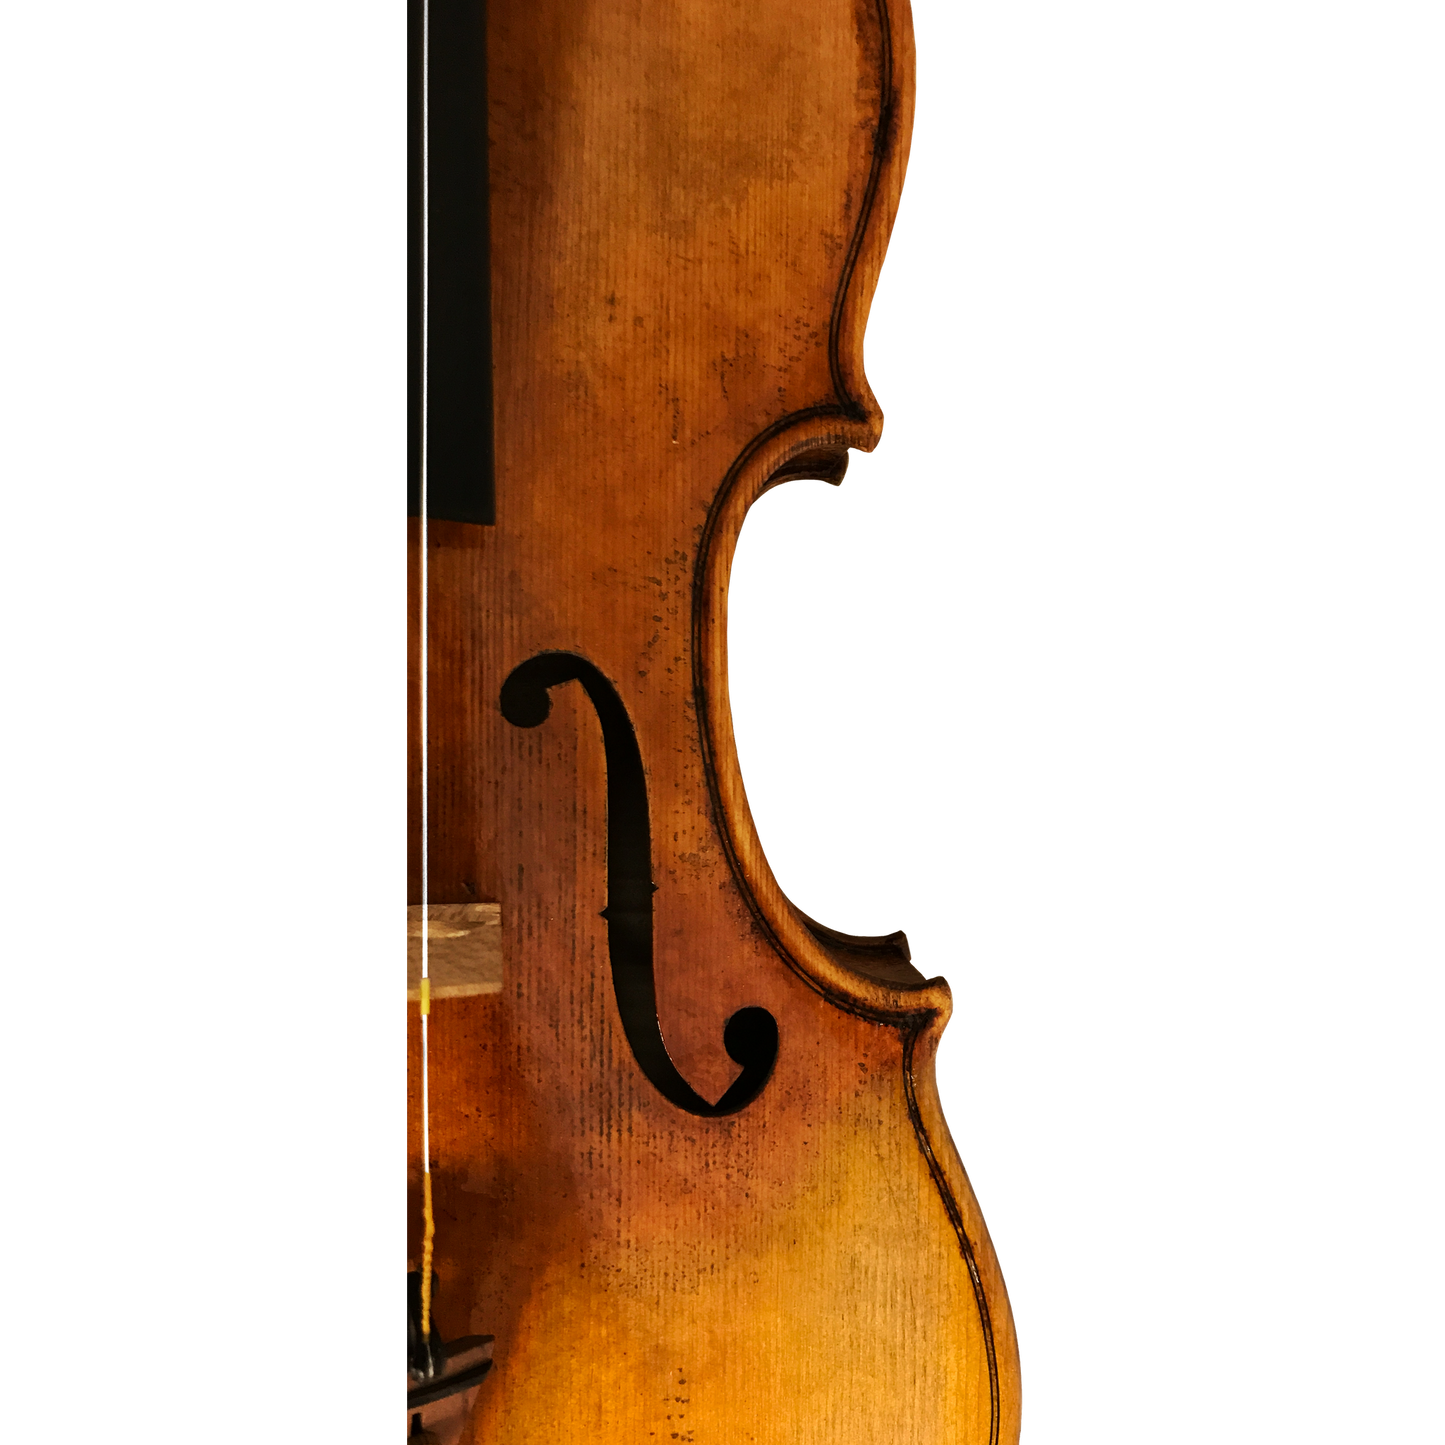 Bench Copy "Giuseppe" Maple Leaf Strings Professional Violin with Case String Power - Violin Shop